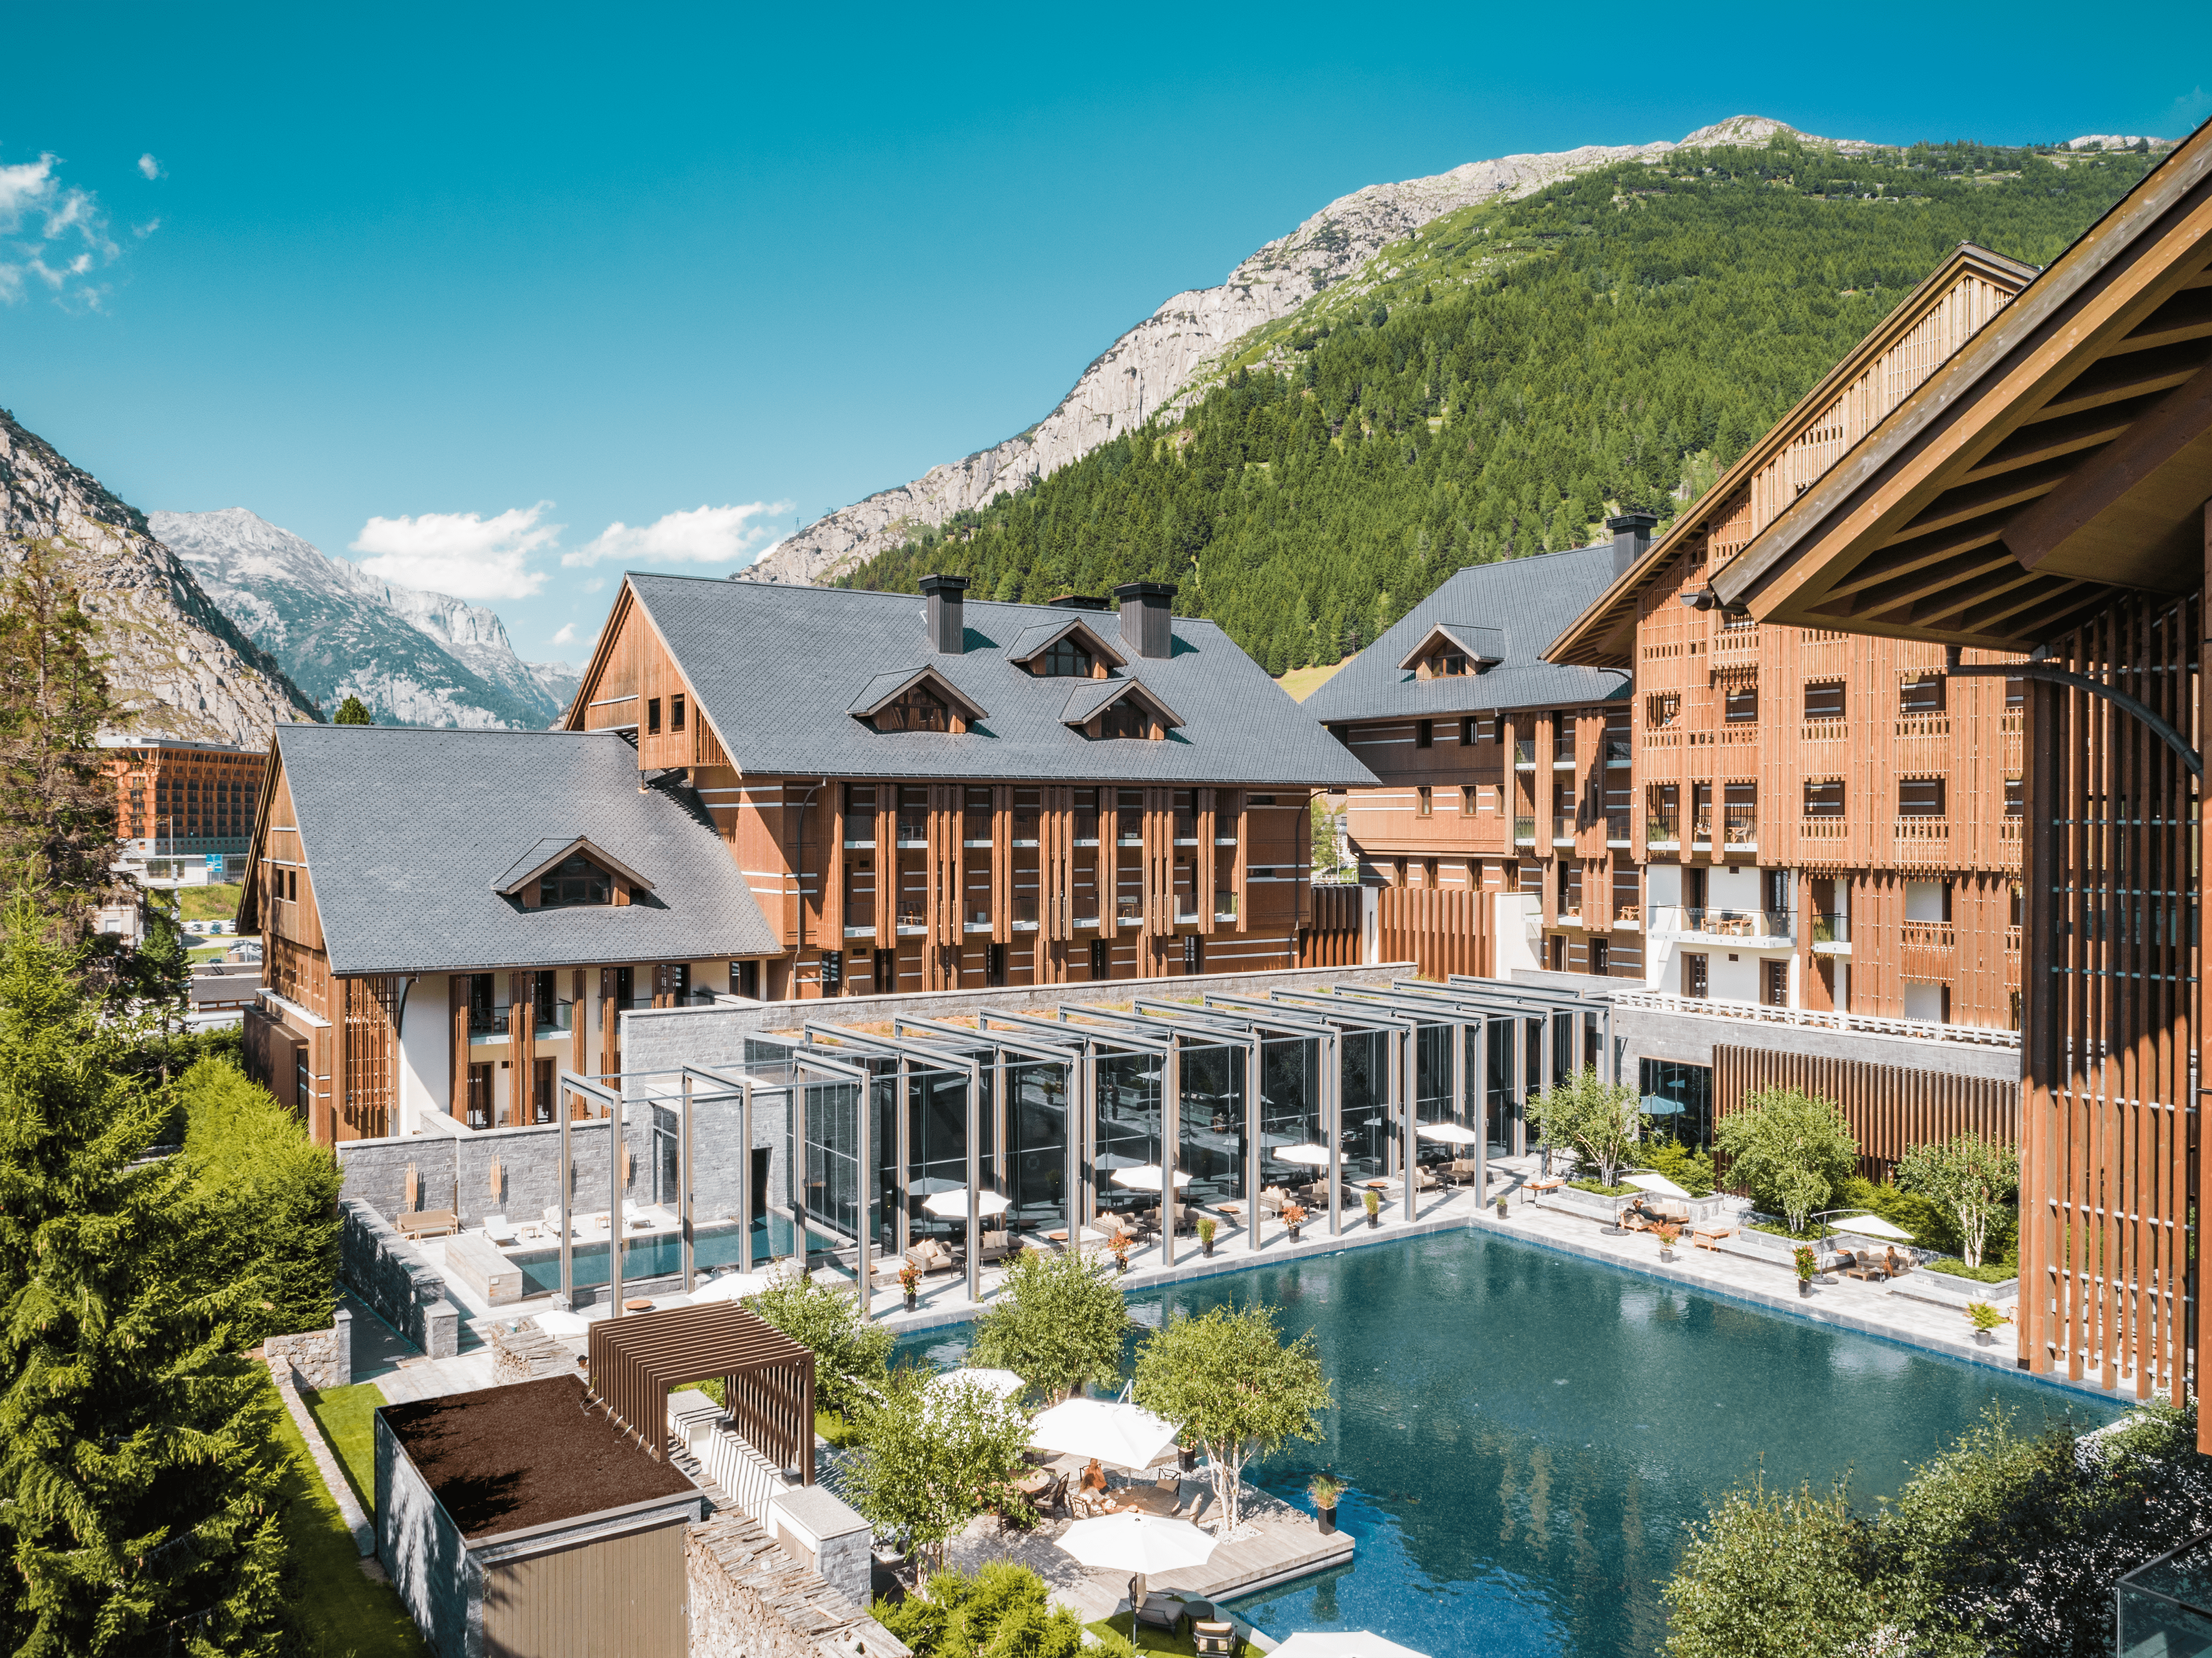 A Building With A Pool In Front Of It And A Mountain In The Background